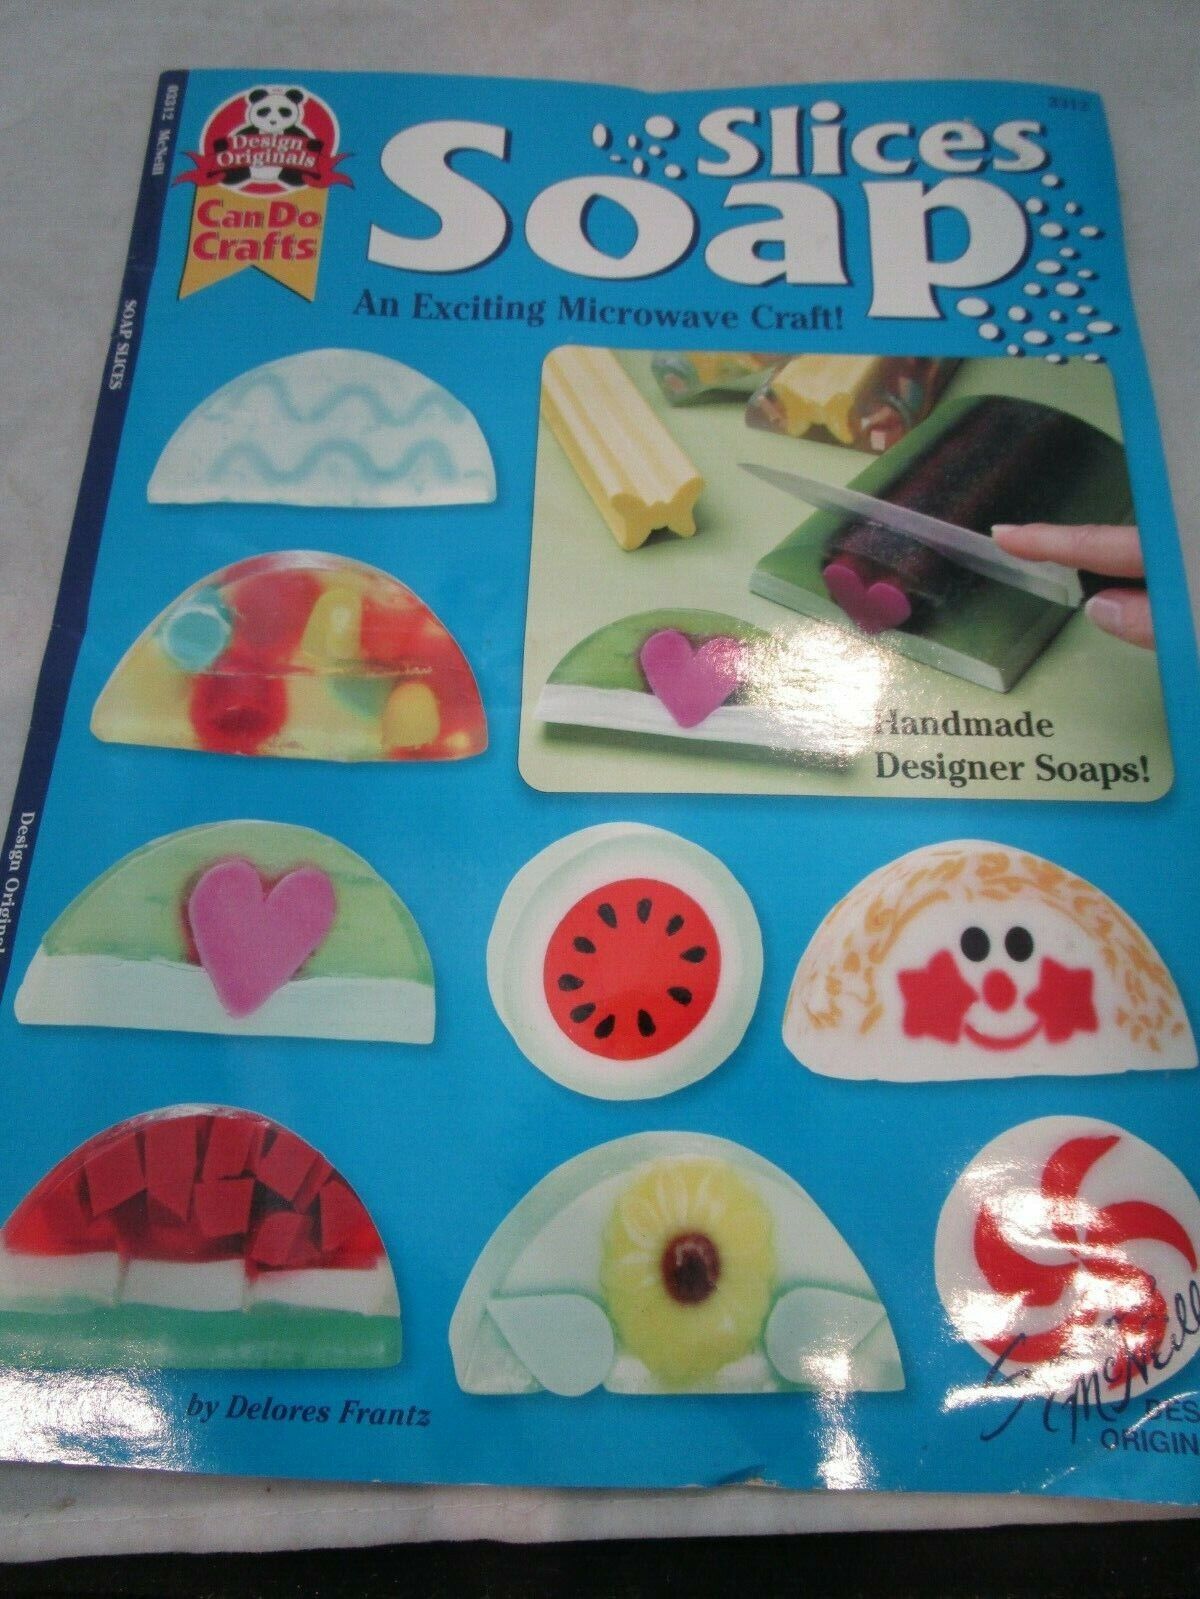 Can Do Crafts Slices Soap Microwave Craft Booklet By Delores Frantz New